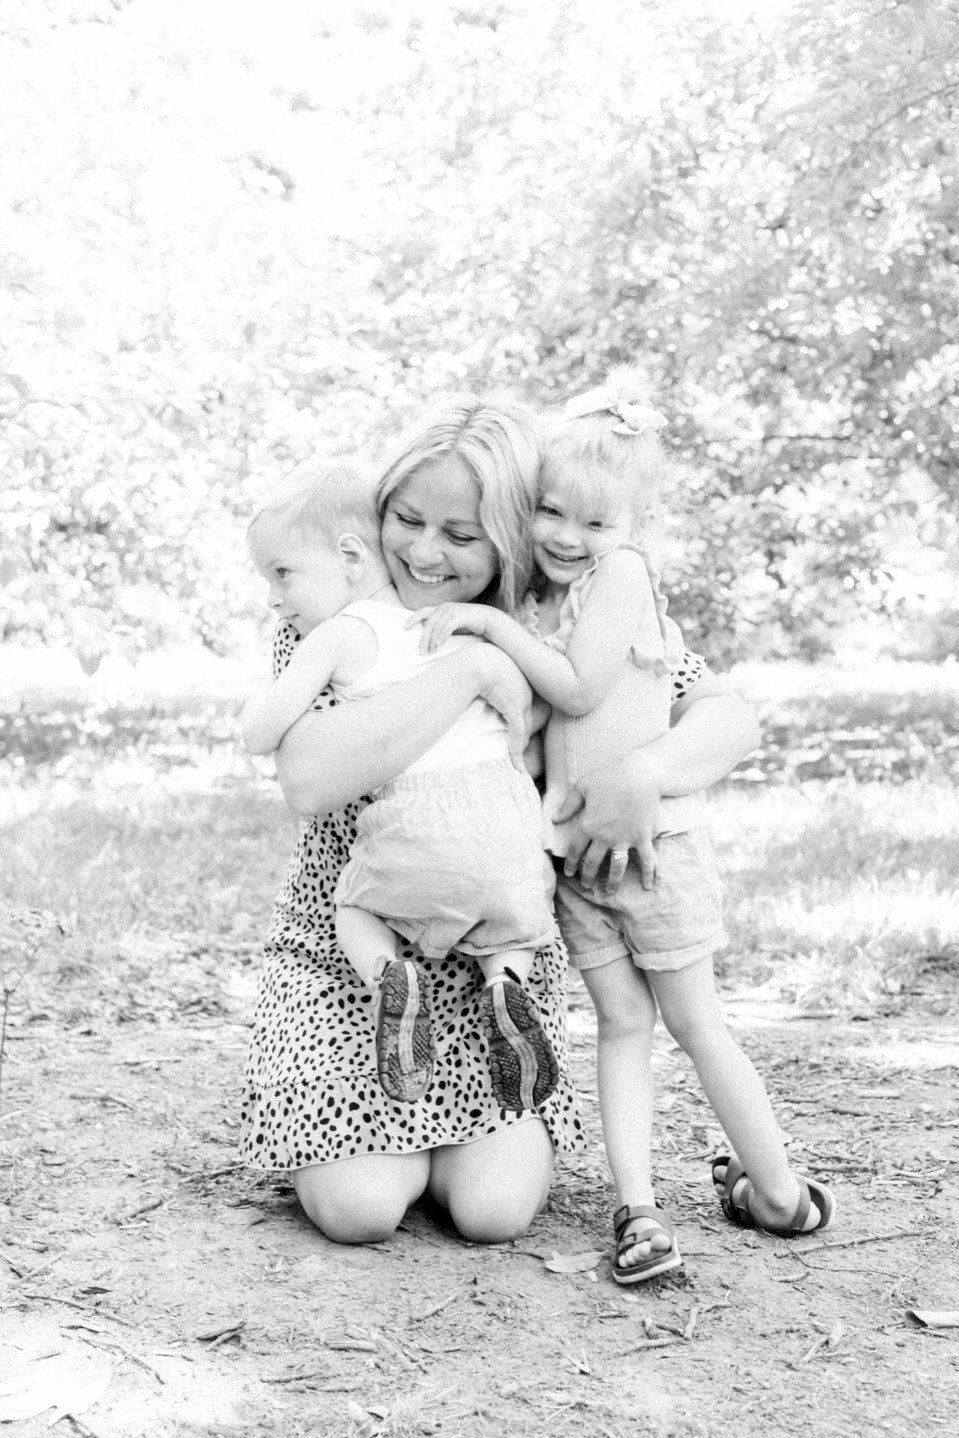 Black and white photo of mother hugging her son and daughter in a fruit orchard, Niagara family photographer, Niagara portrait photographer, family photography, portrait photography, candid photography, authentic photography, Emily VanderBeek Photography.